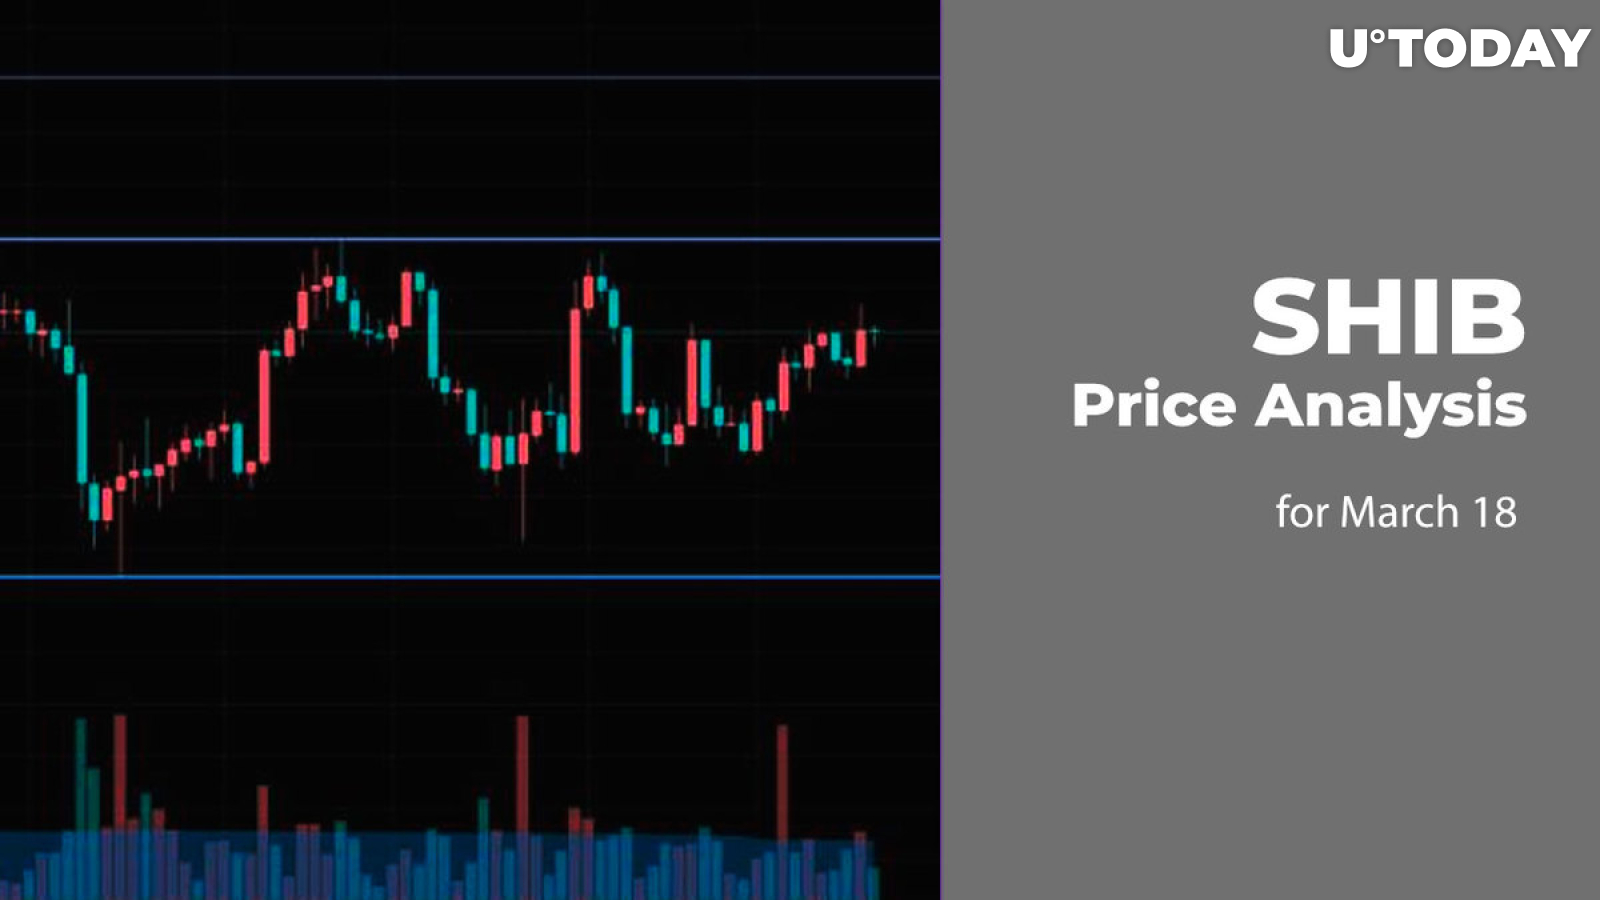 SHIB Price Analysis for March 18